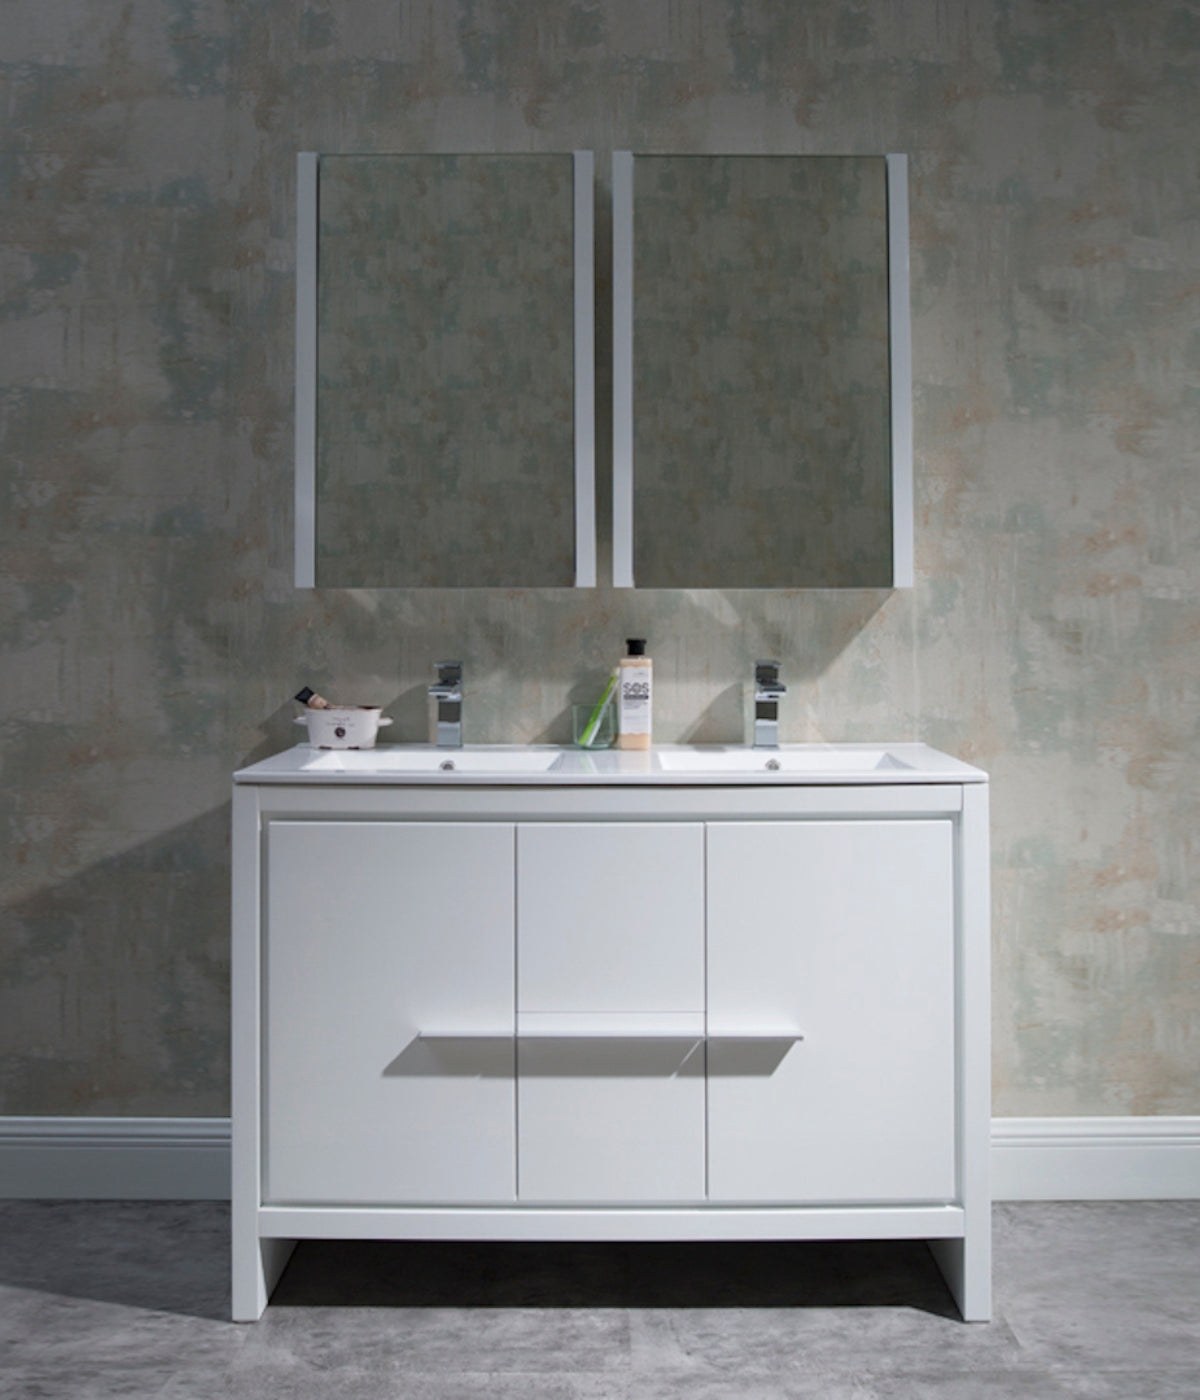 Blossoms Milan 42 is an ALL WOOD, plywood based bathroom wood vanity